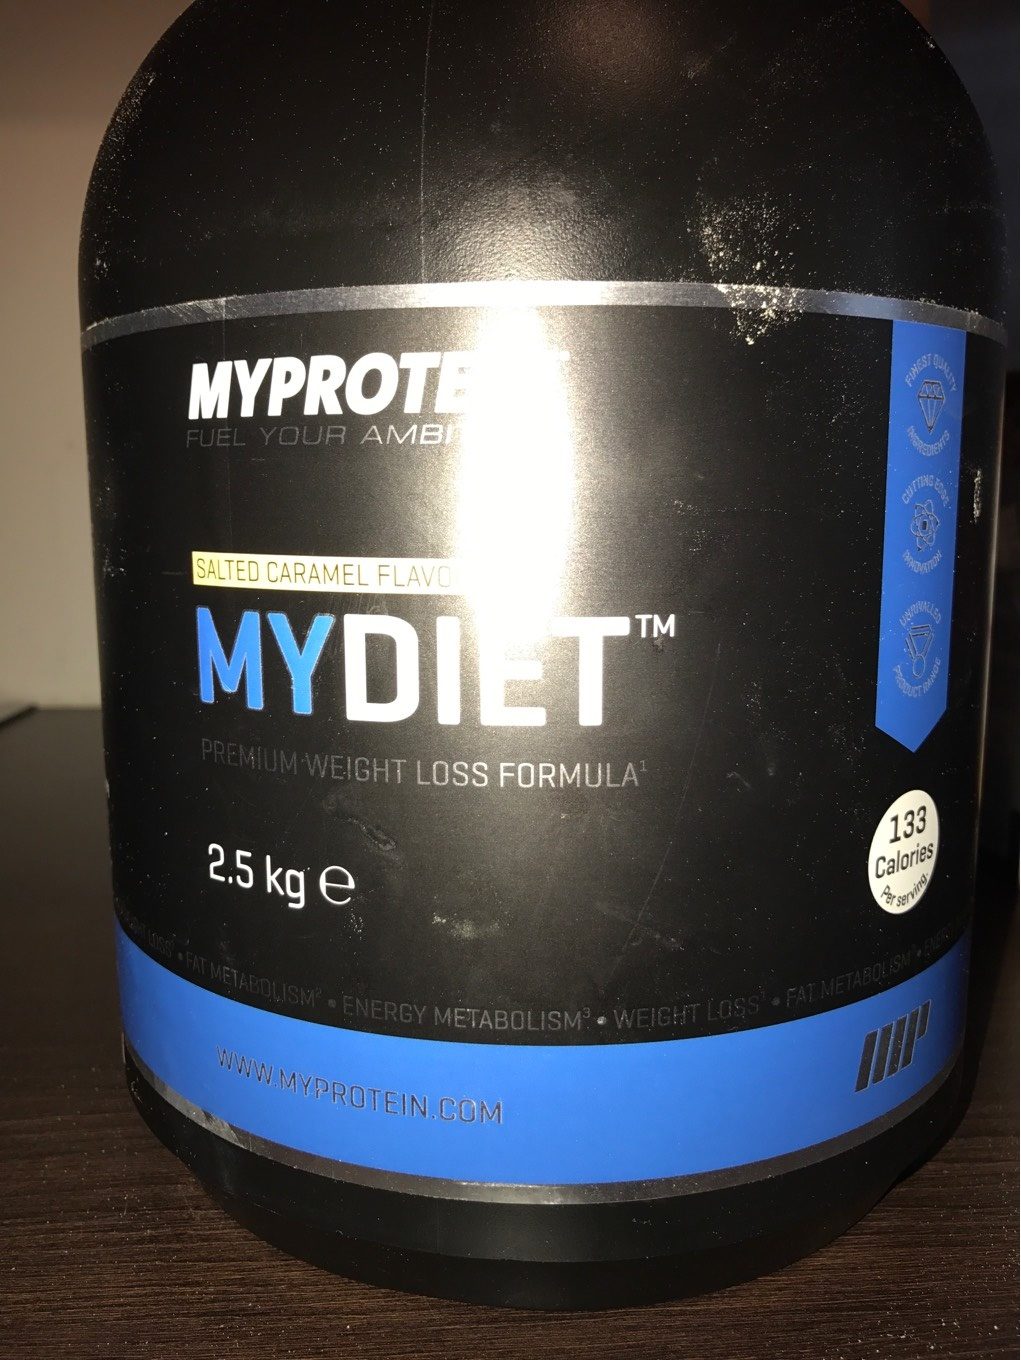 Mydiet - Product - fr